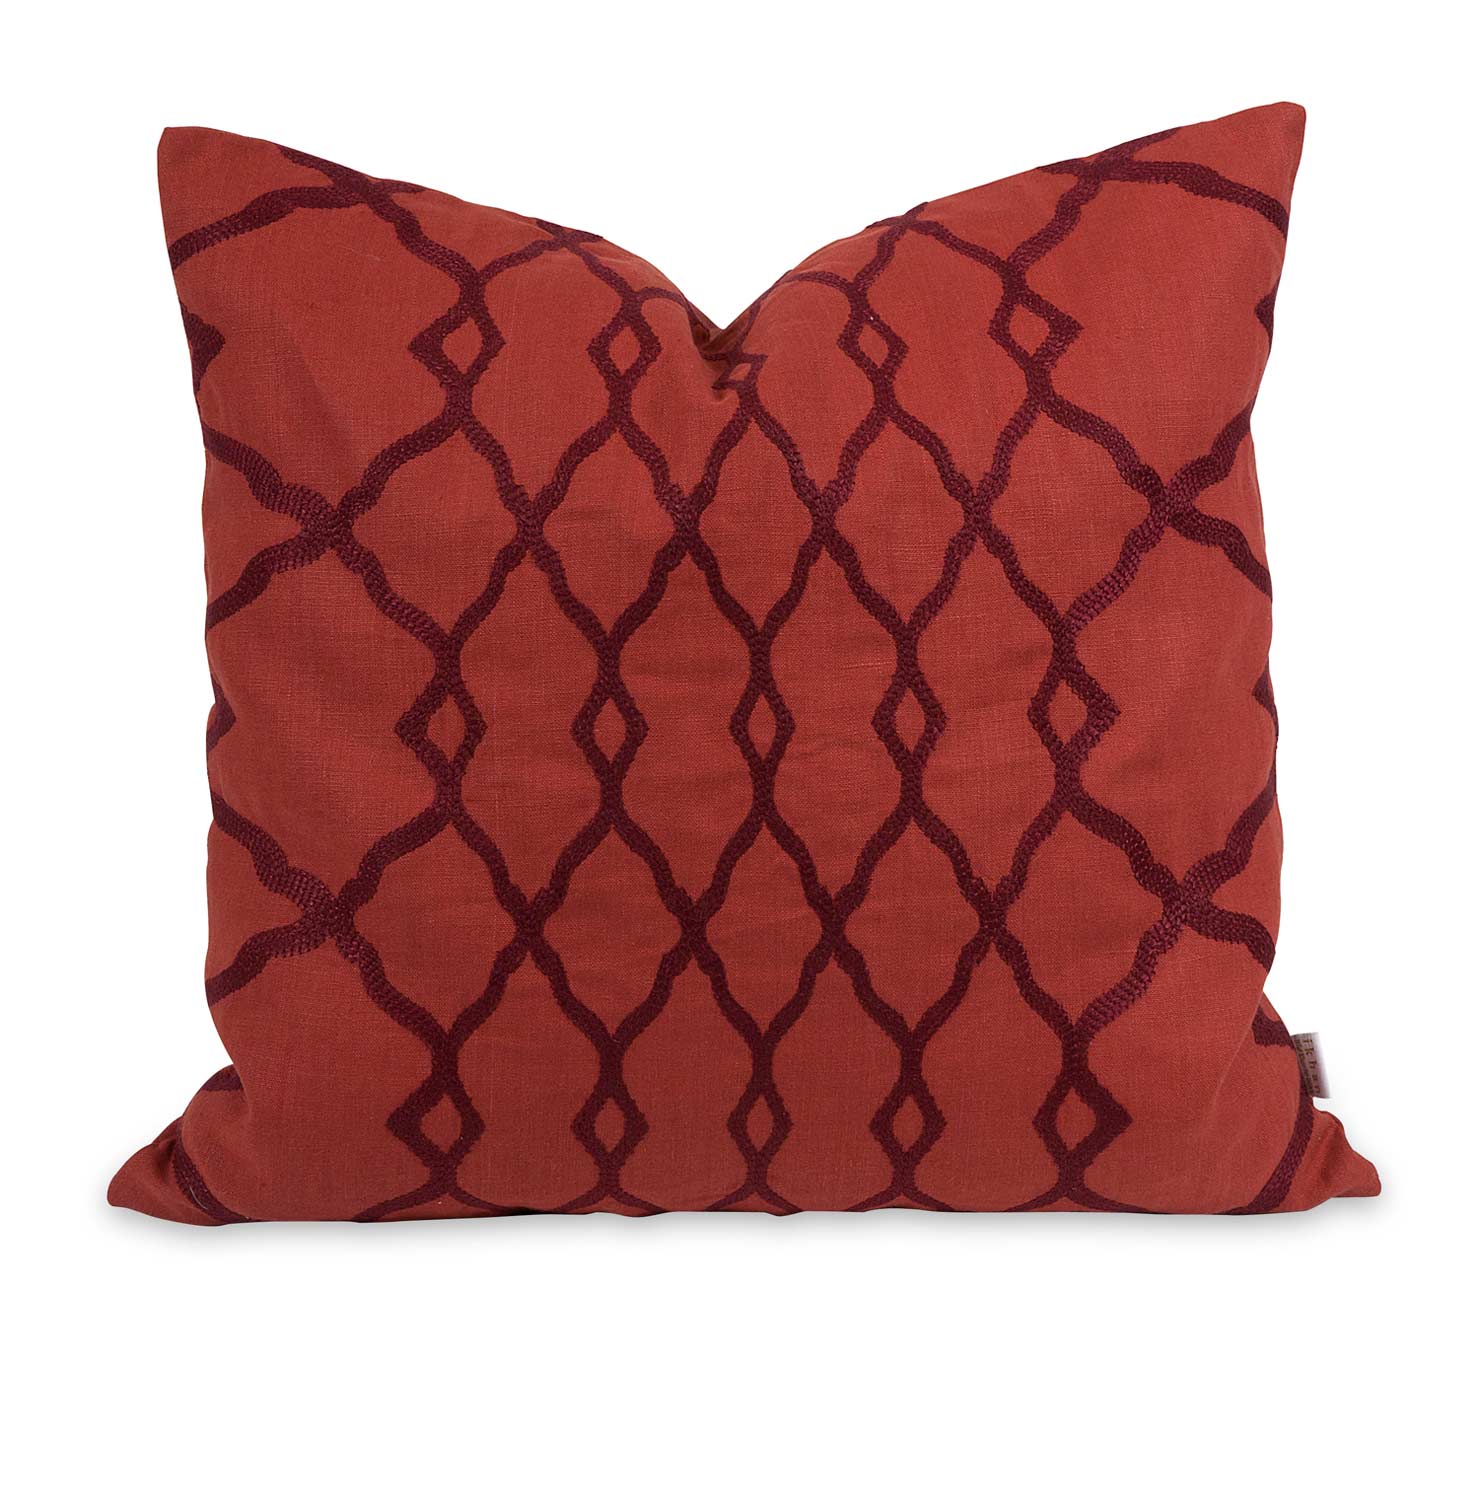 IMAX Ik Dyani Embroidered Pillow with Down Insert